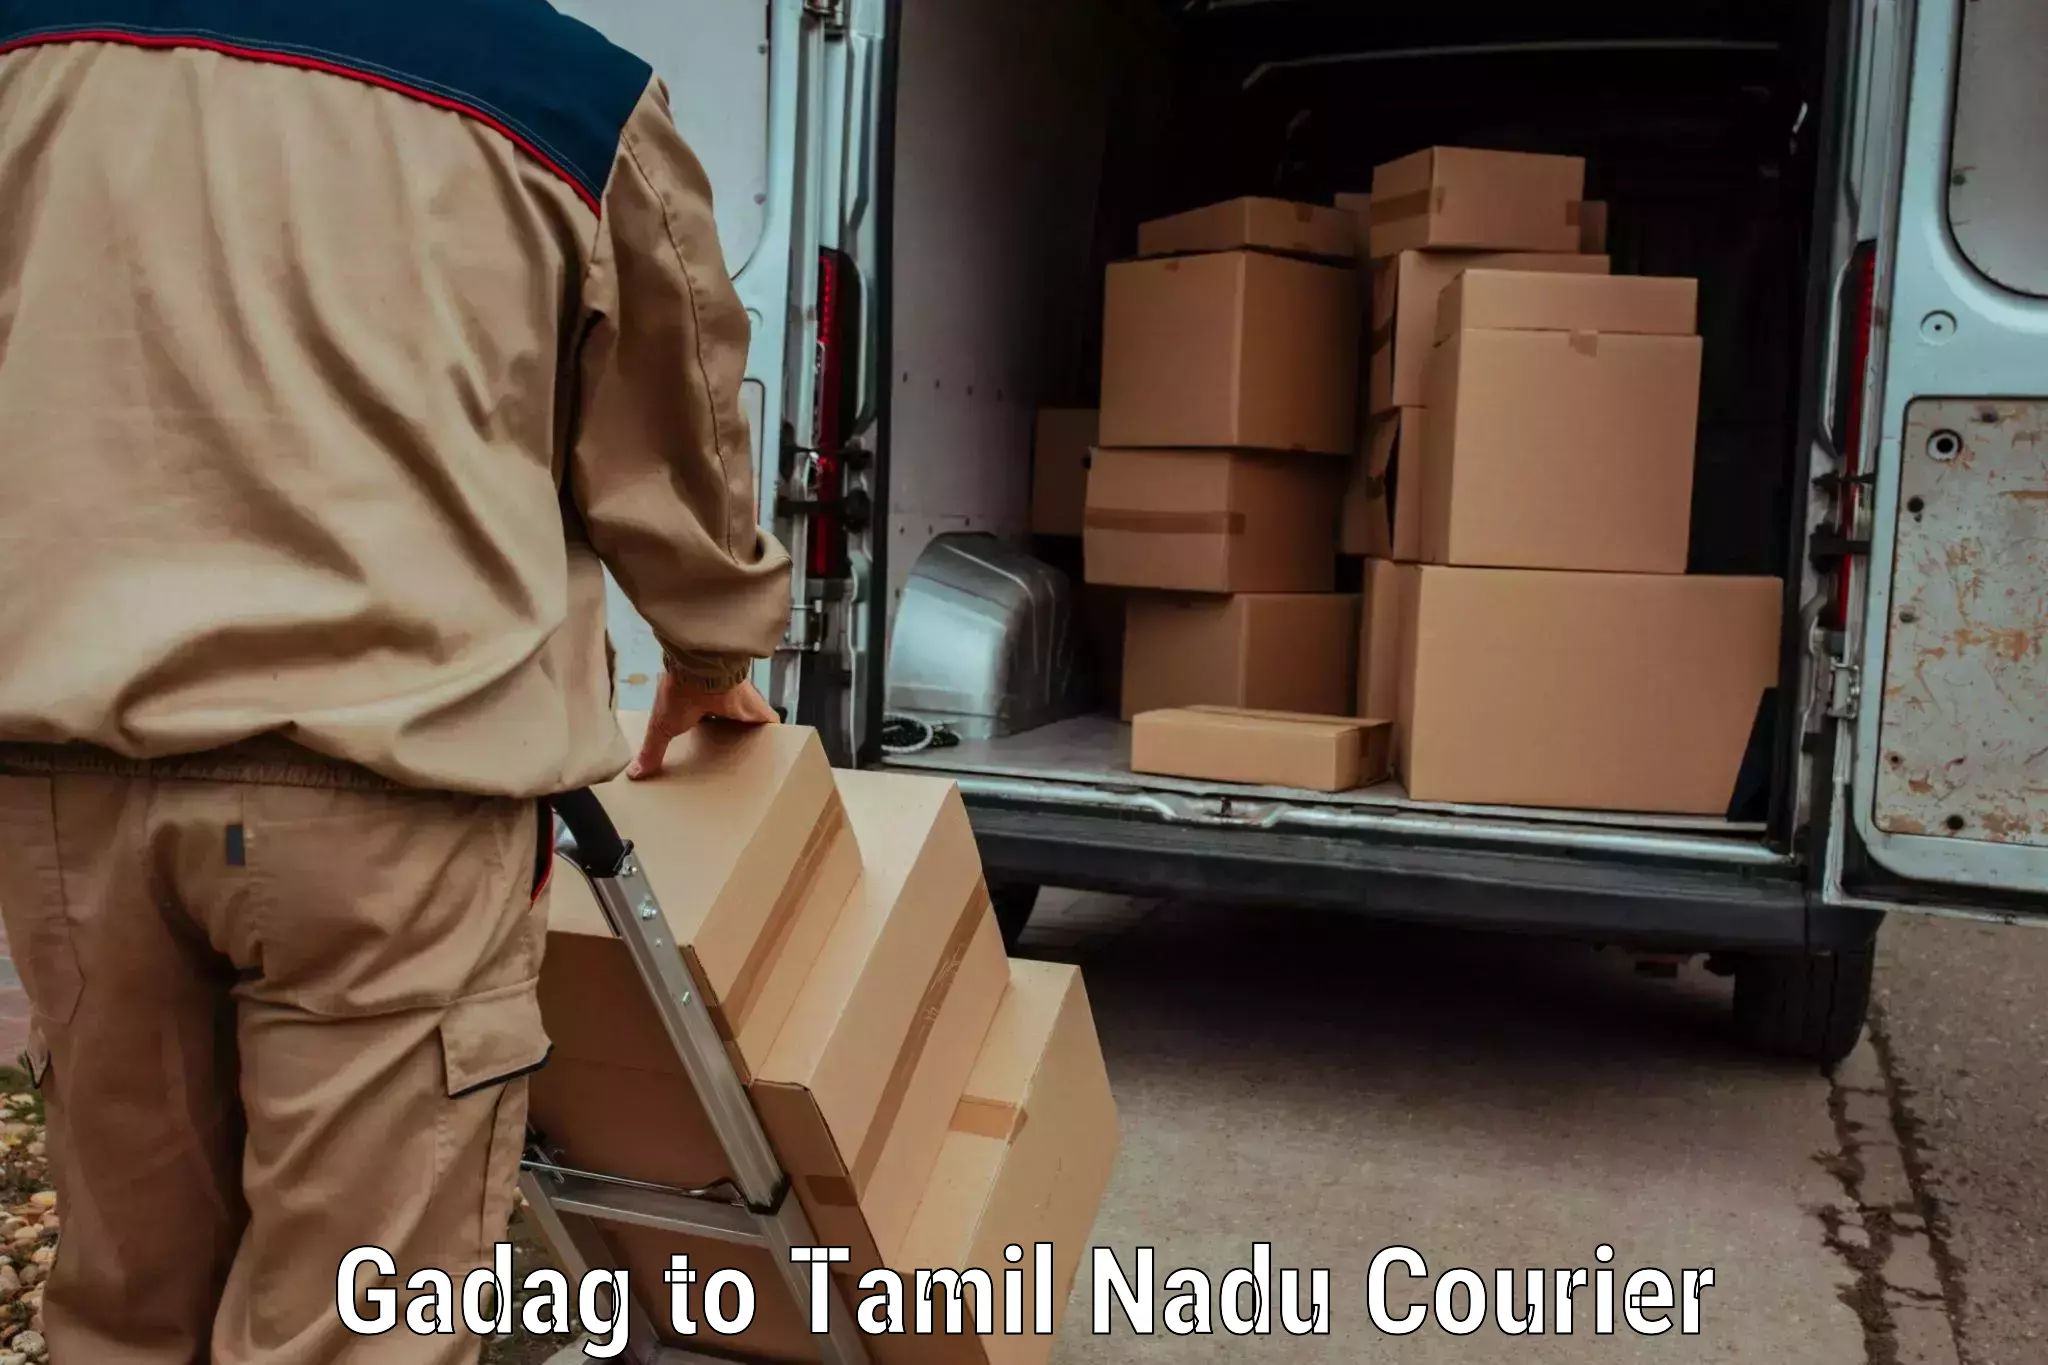 State-of-the-art courier technology Gadag to Tamil Nadu